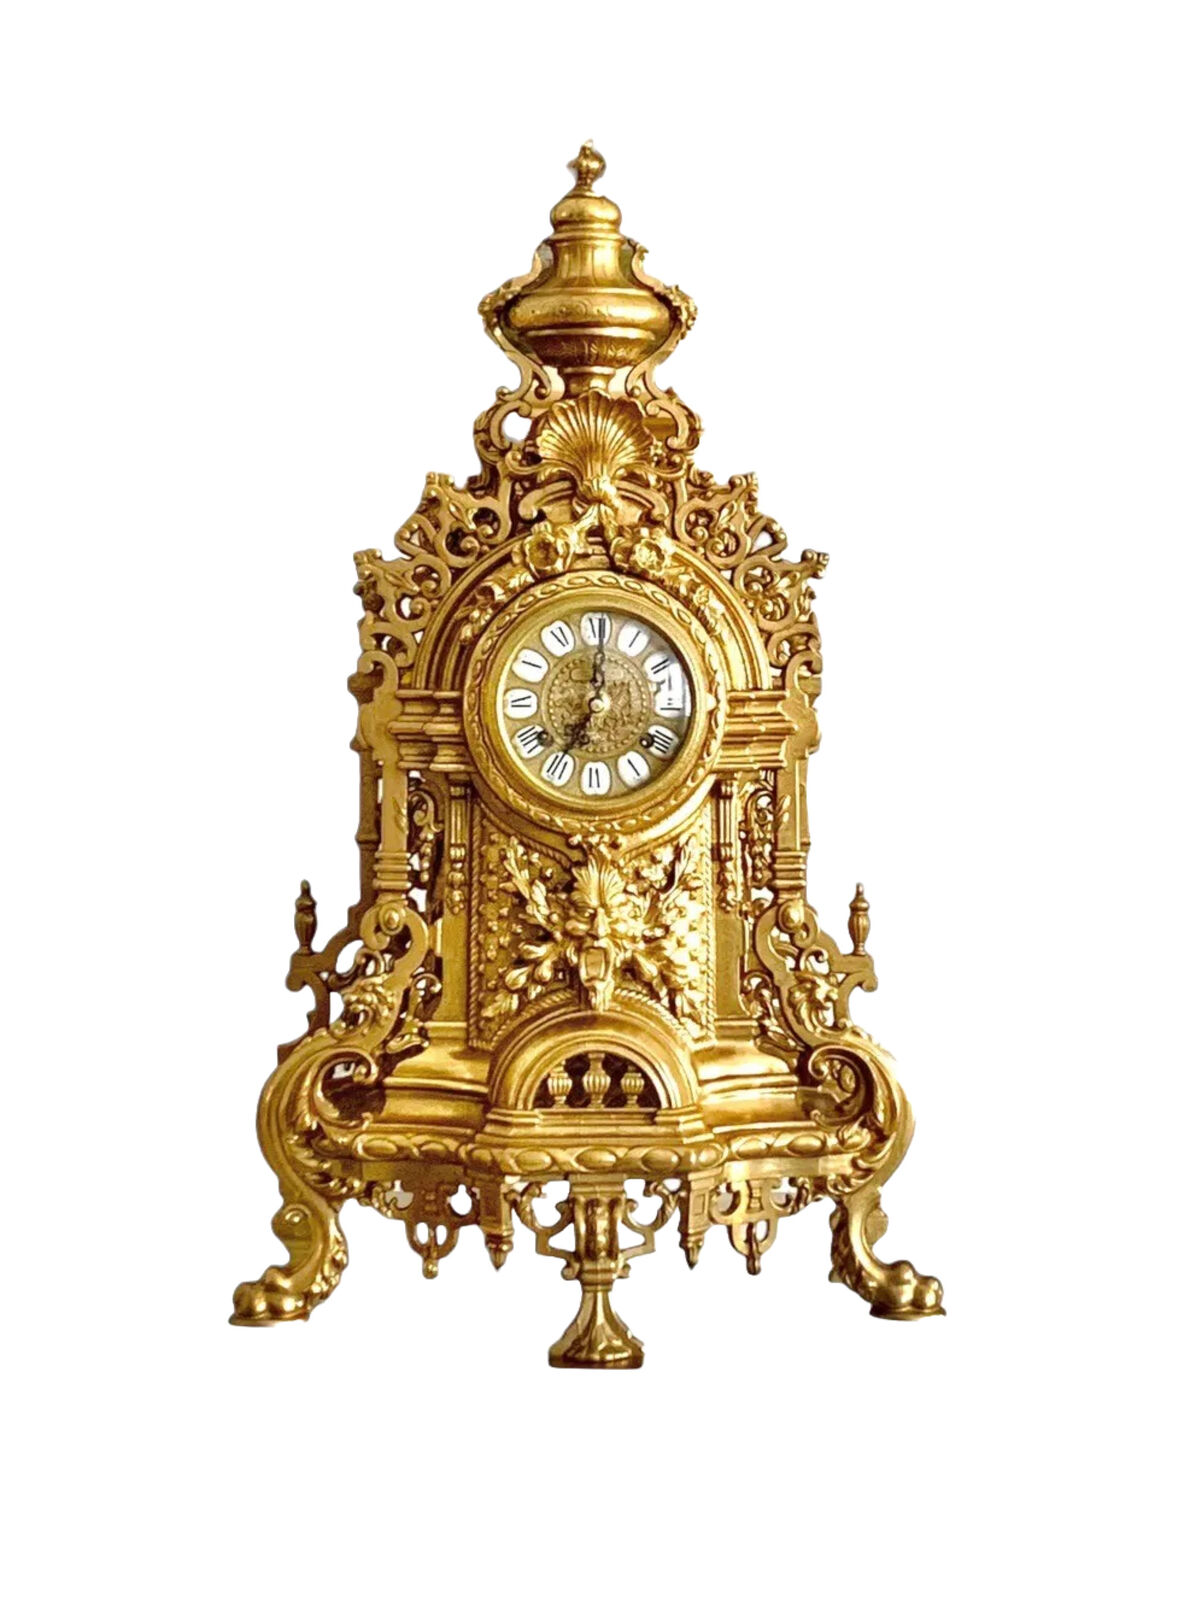 Mantel Clock Imperial Style Heavy Brass Made in Italy Luxurious Vintage Decor